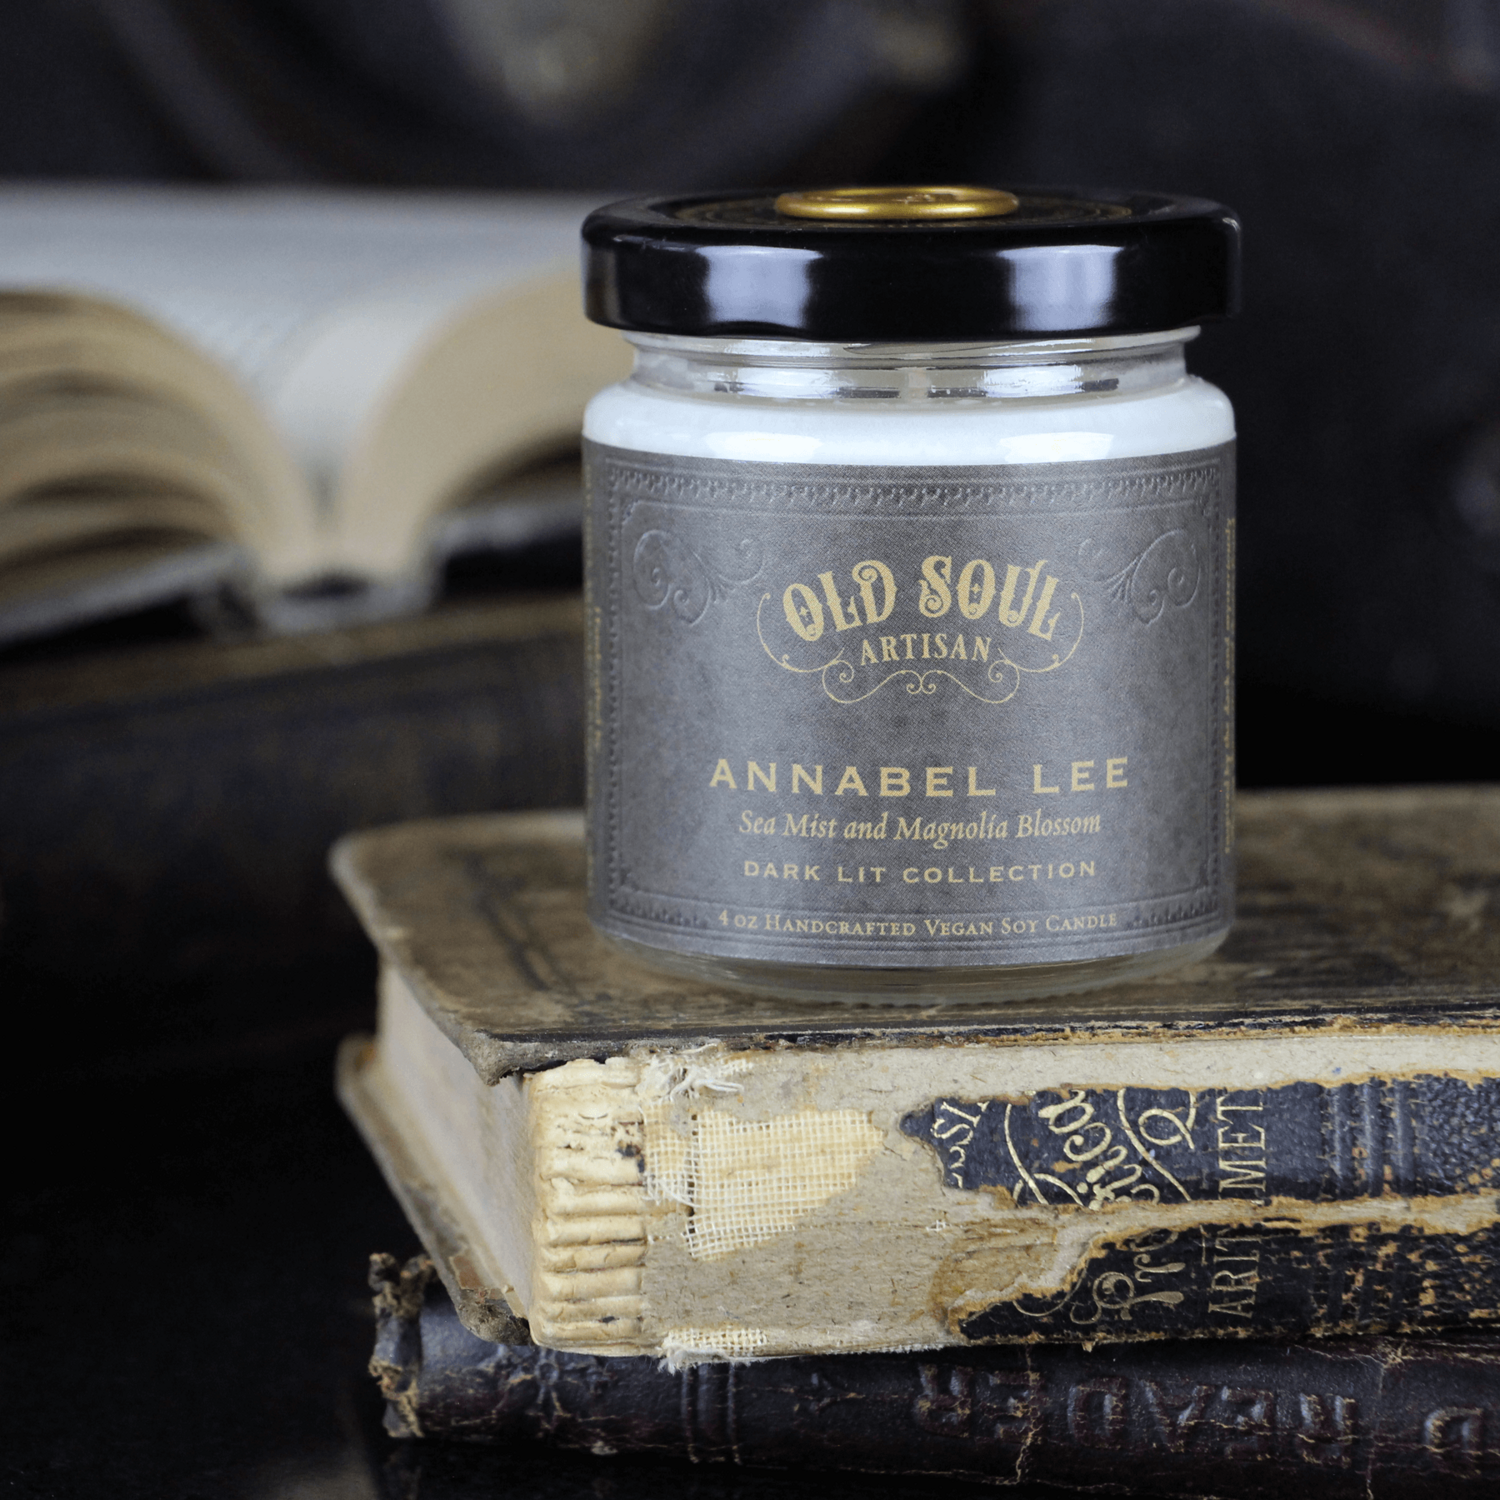 Old Soul Artisan Annabel Lee Candle